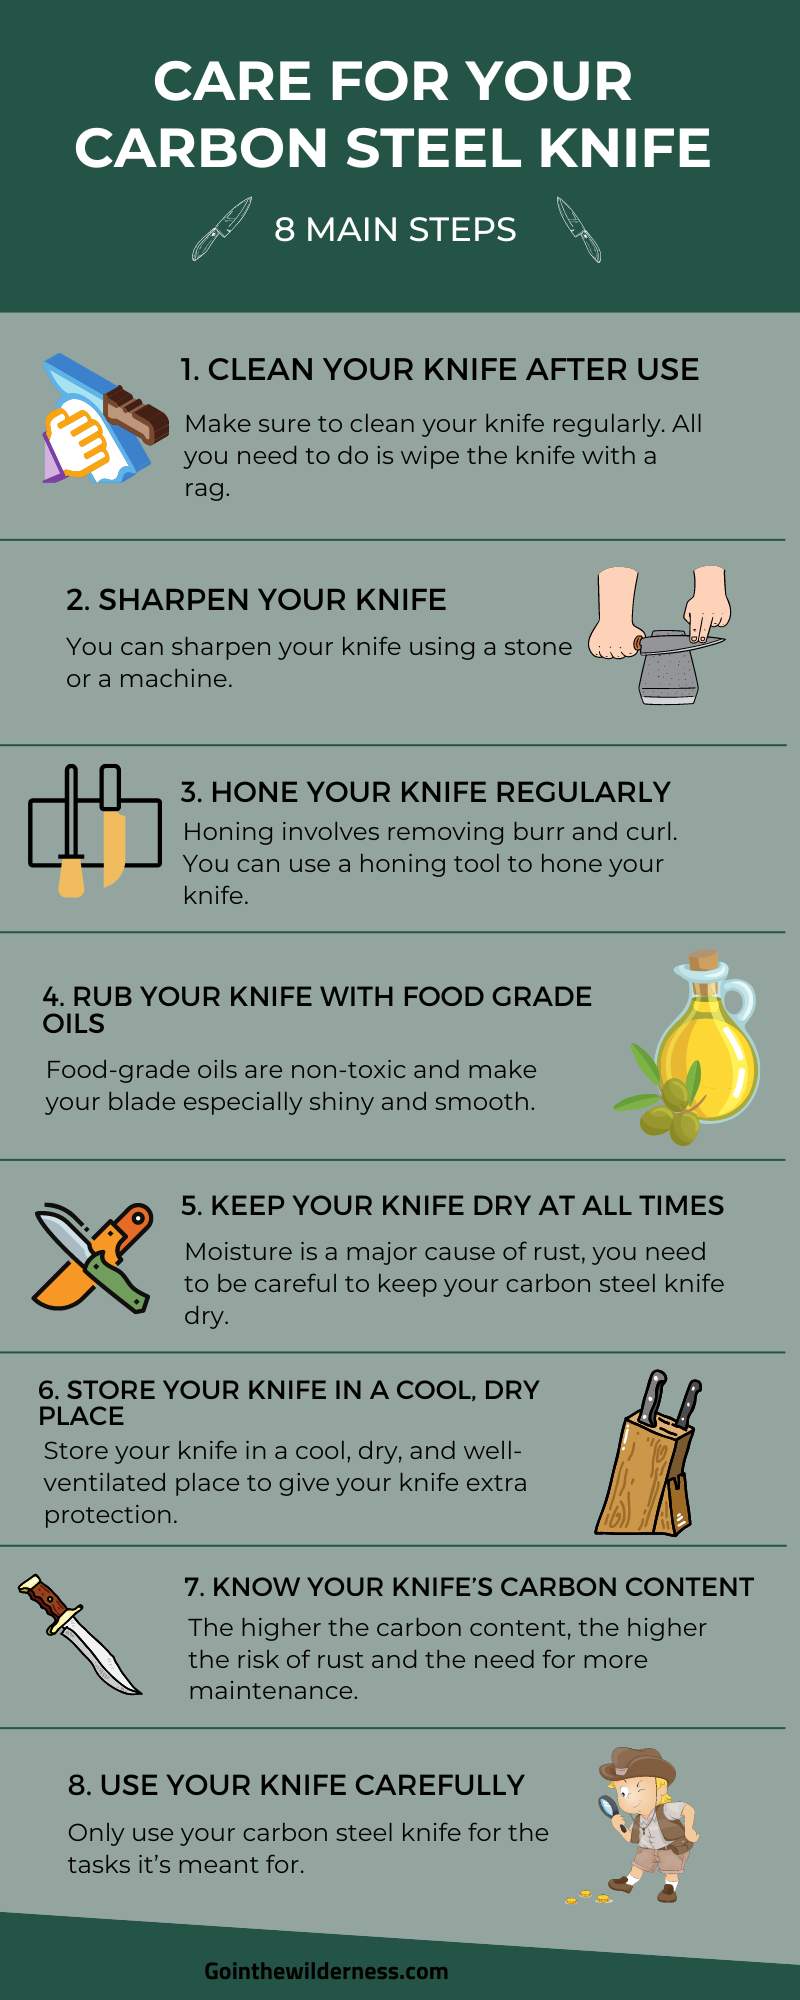 8 Ways to Care For Your Carbon Steel Knife